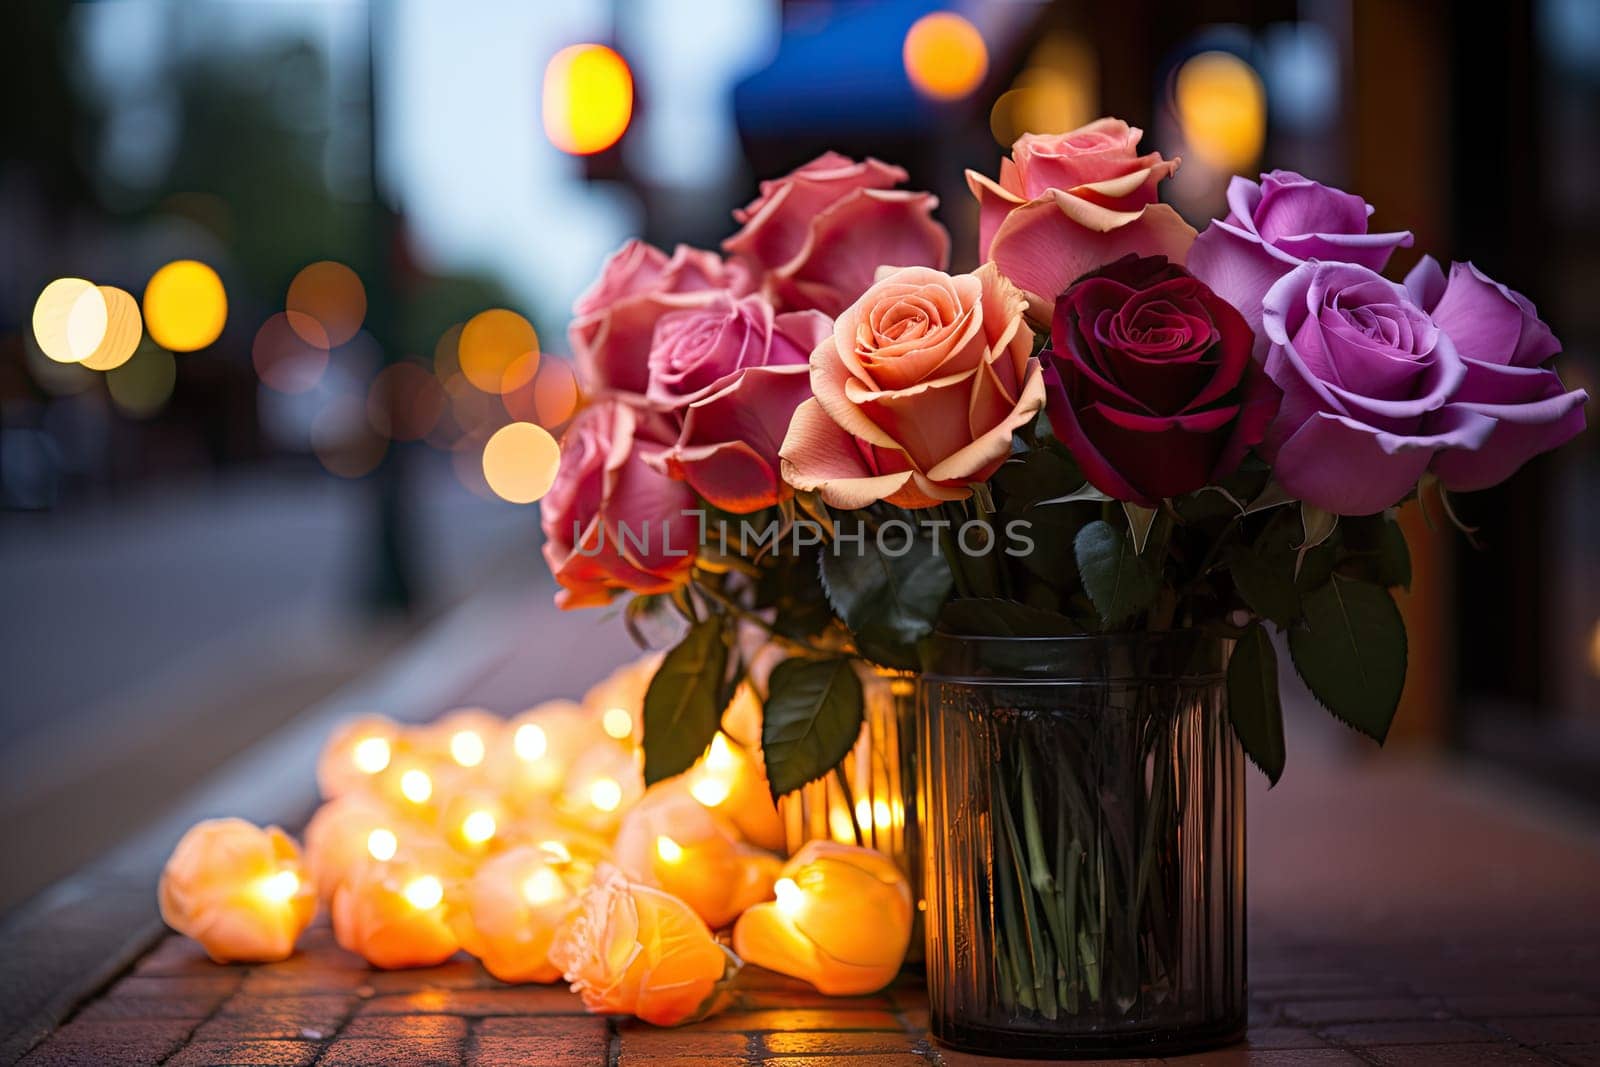 flowers in a vase on a table with candles and lights all around the place where there is no one flower